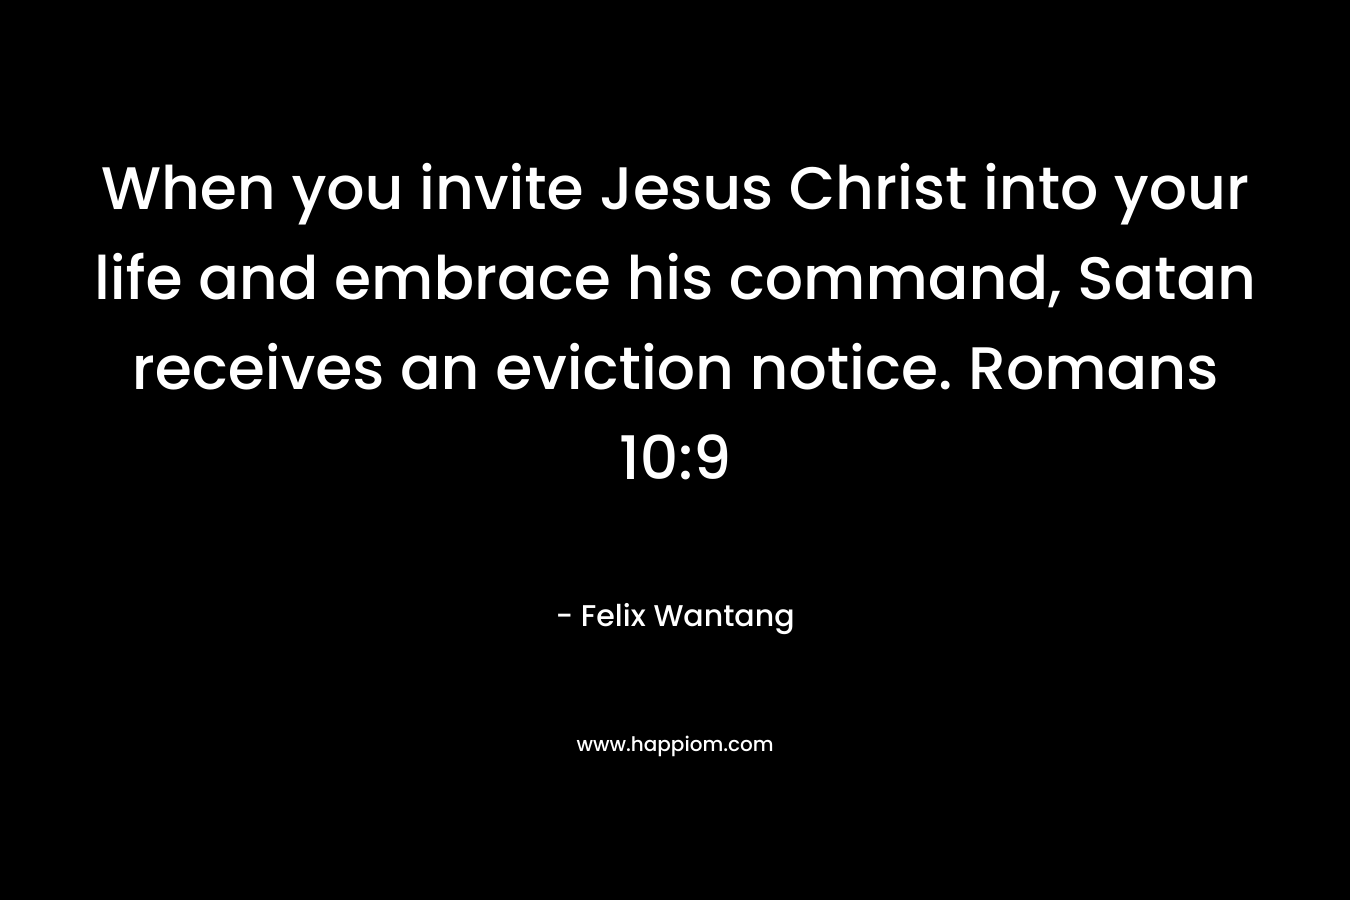 When you invite Jesus Christ into your life and embrace his command, Satan receives an eviction notice. Romans 10:9 – Felix Wantang